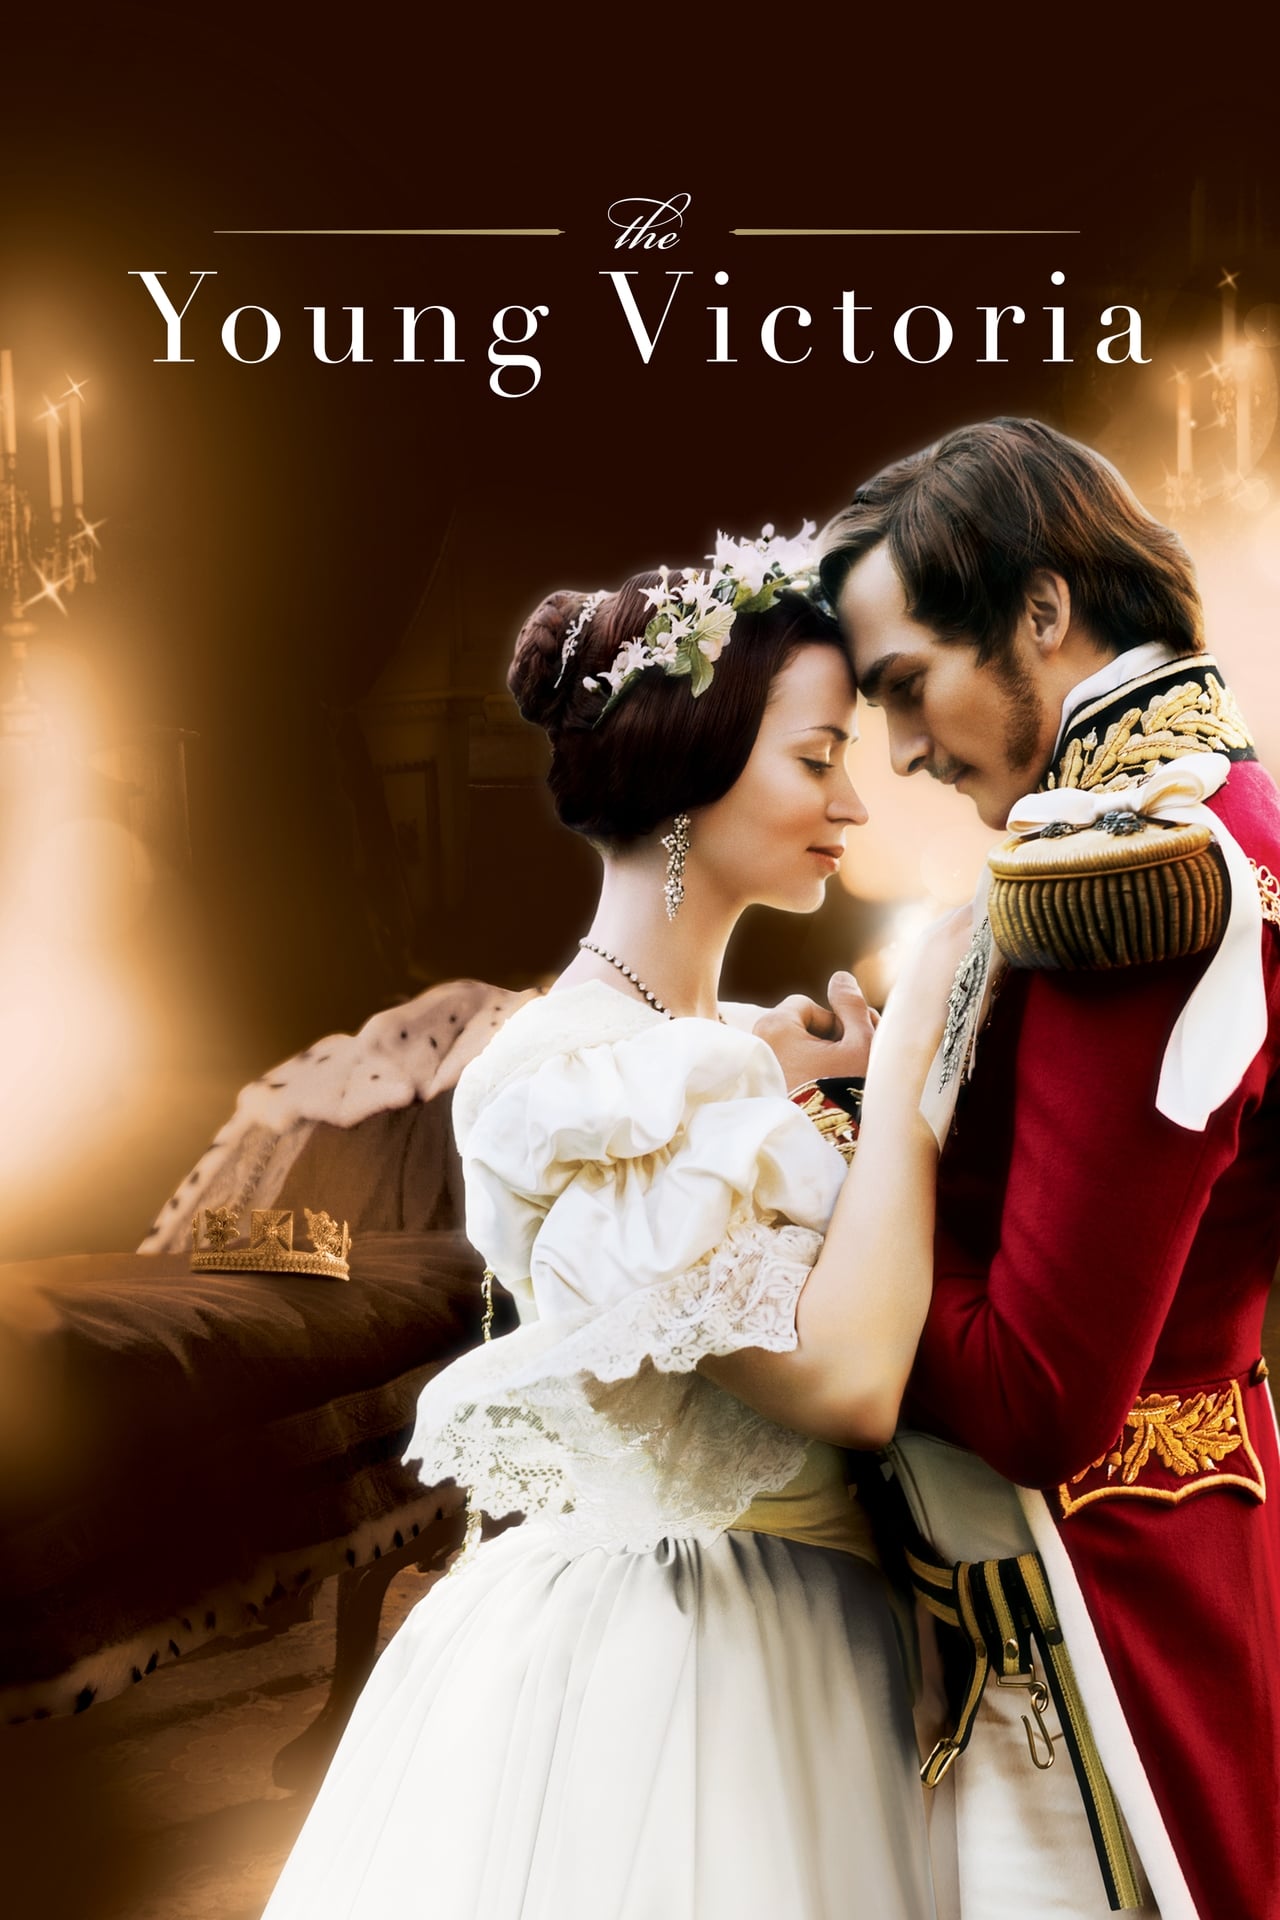 The Young Victoria on Netflix